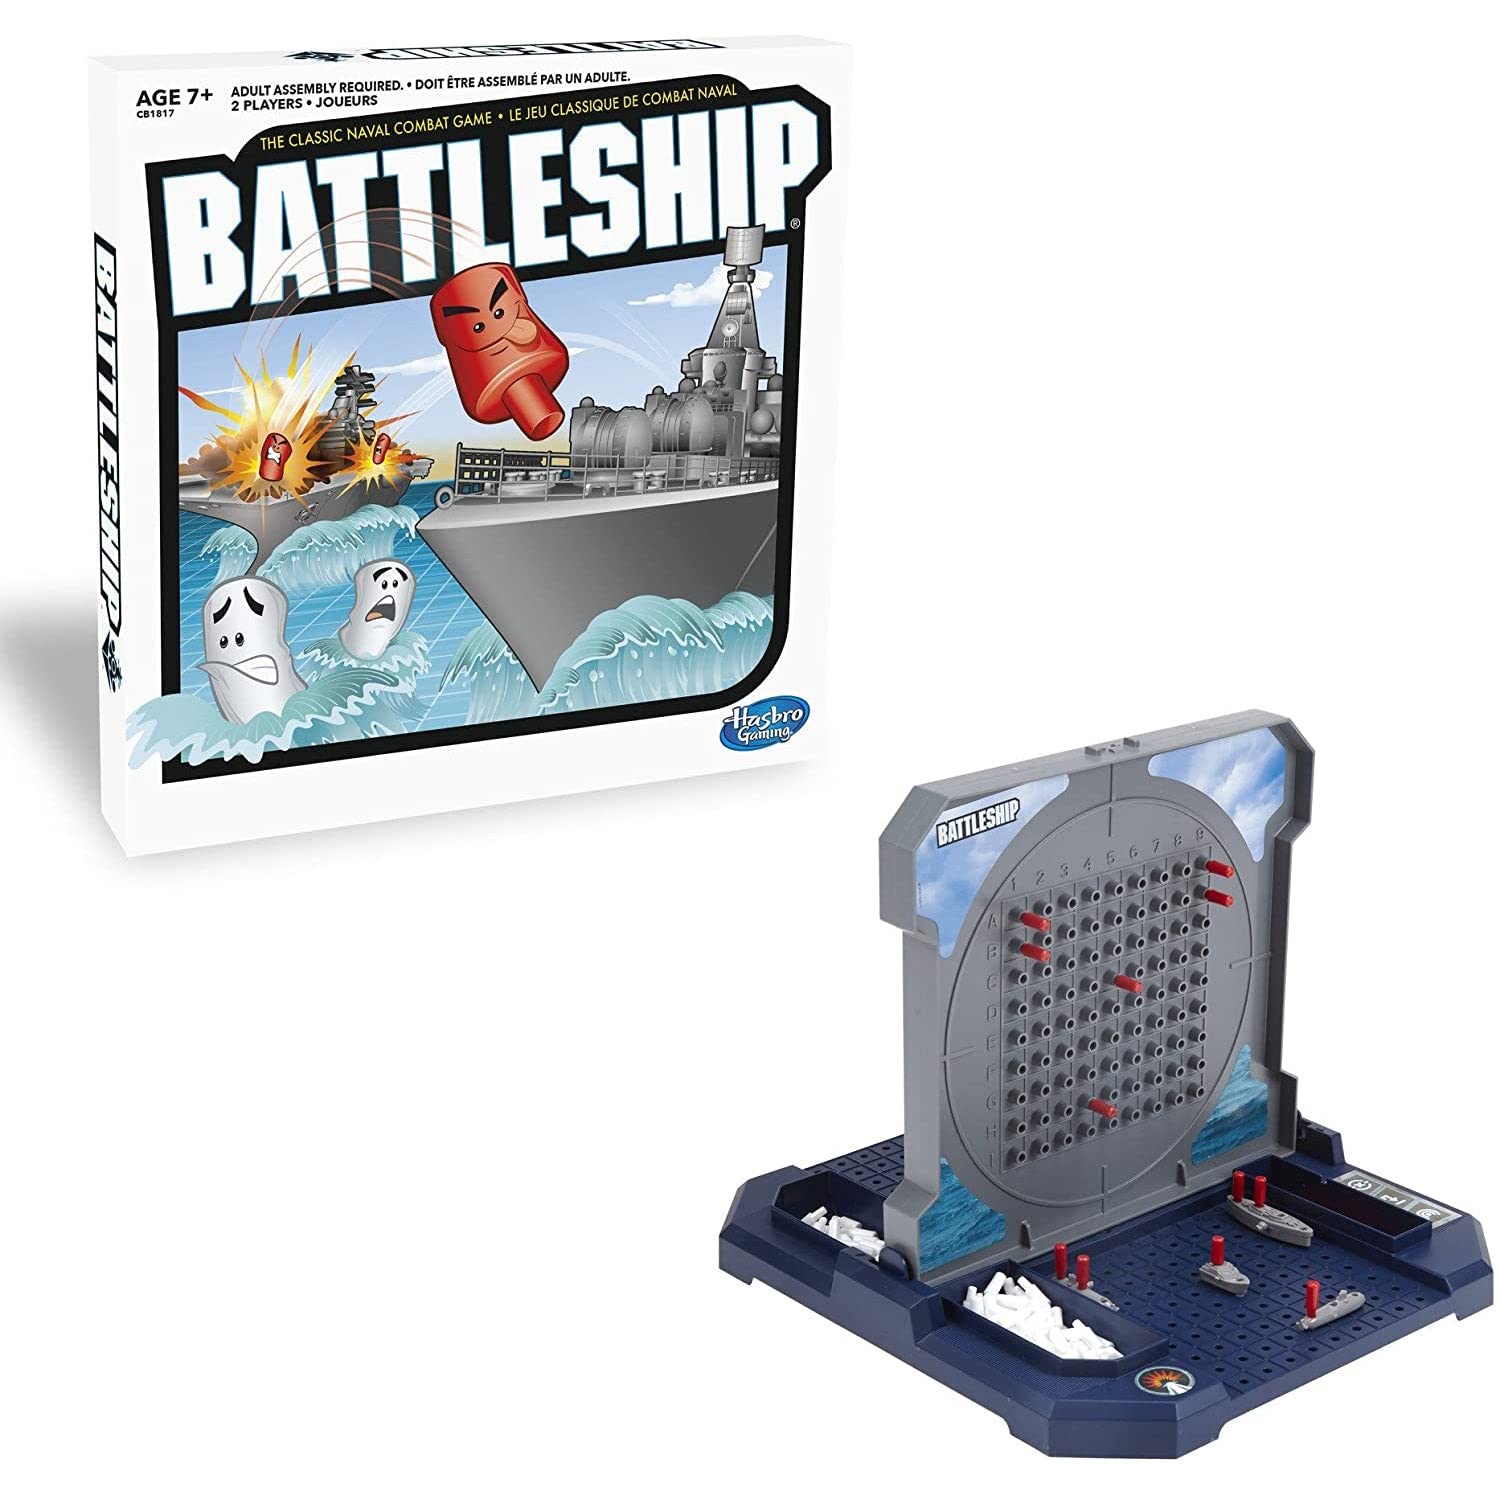 Battleship With Planes Strategy Board Game For Ages 7 and Up (Amazon Exclusive)